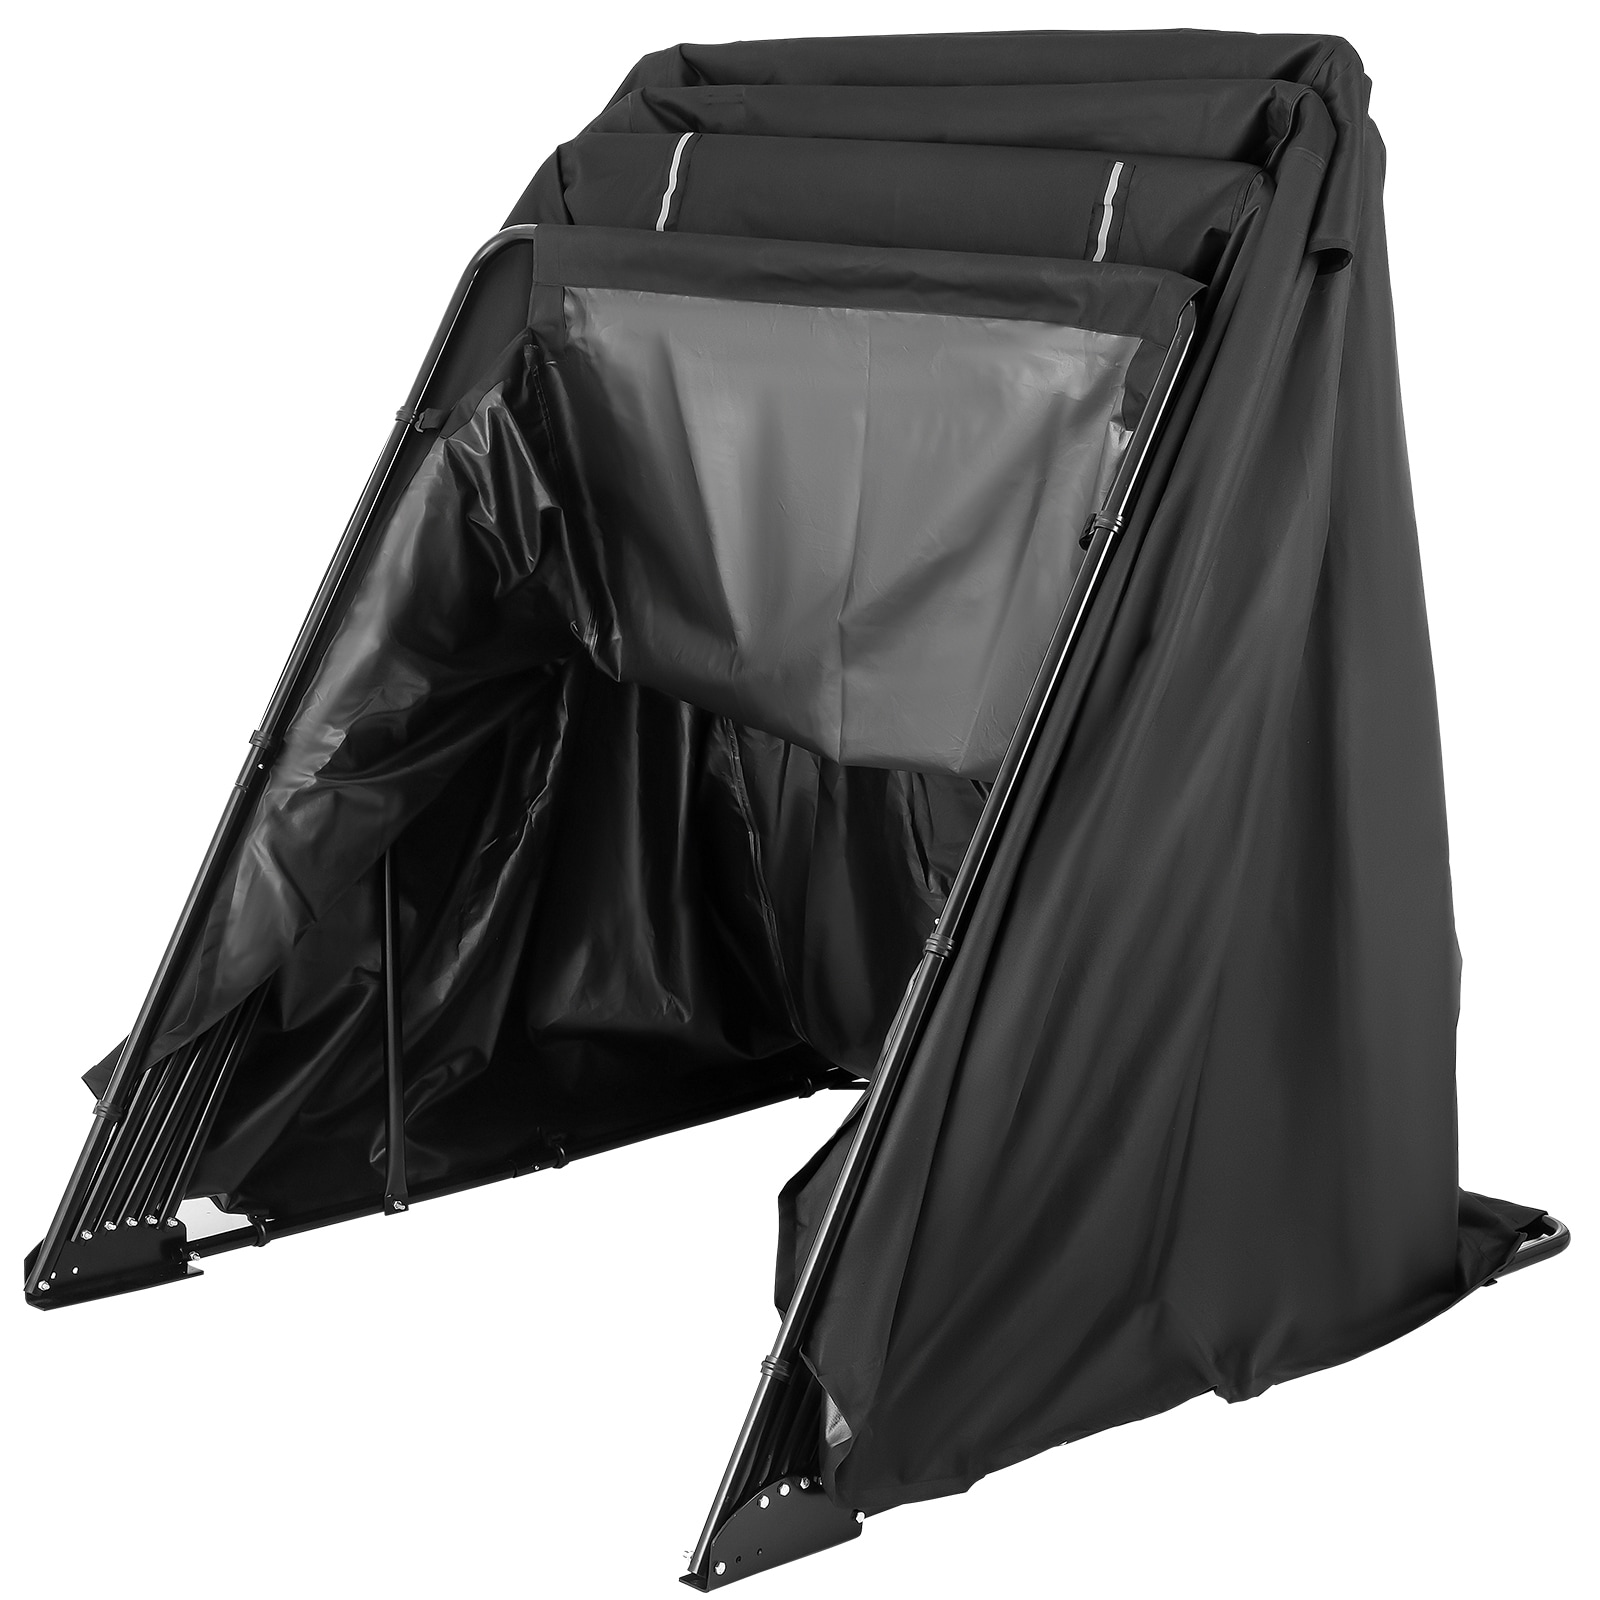 The Bike Shield - Motorcycle Shelter / Garage / Shed / Storage / Outdoor  Cover / Cover / Protection / Tent